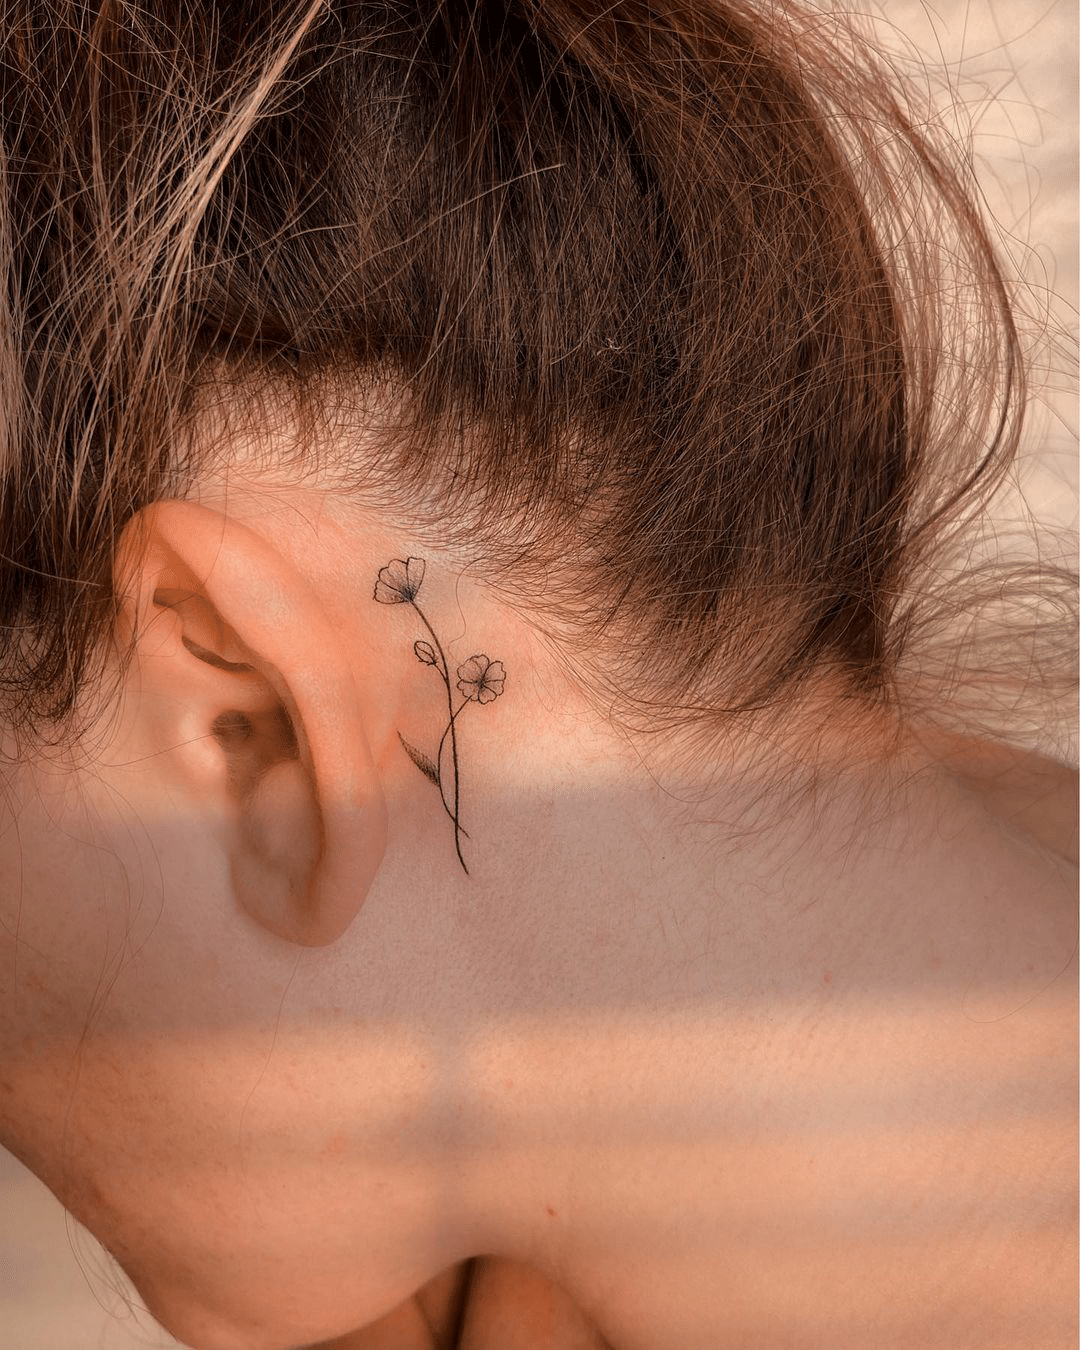 small behind the ear tattoo design ideas for women